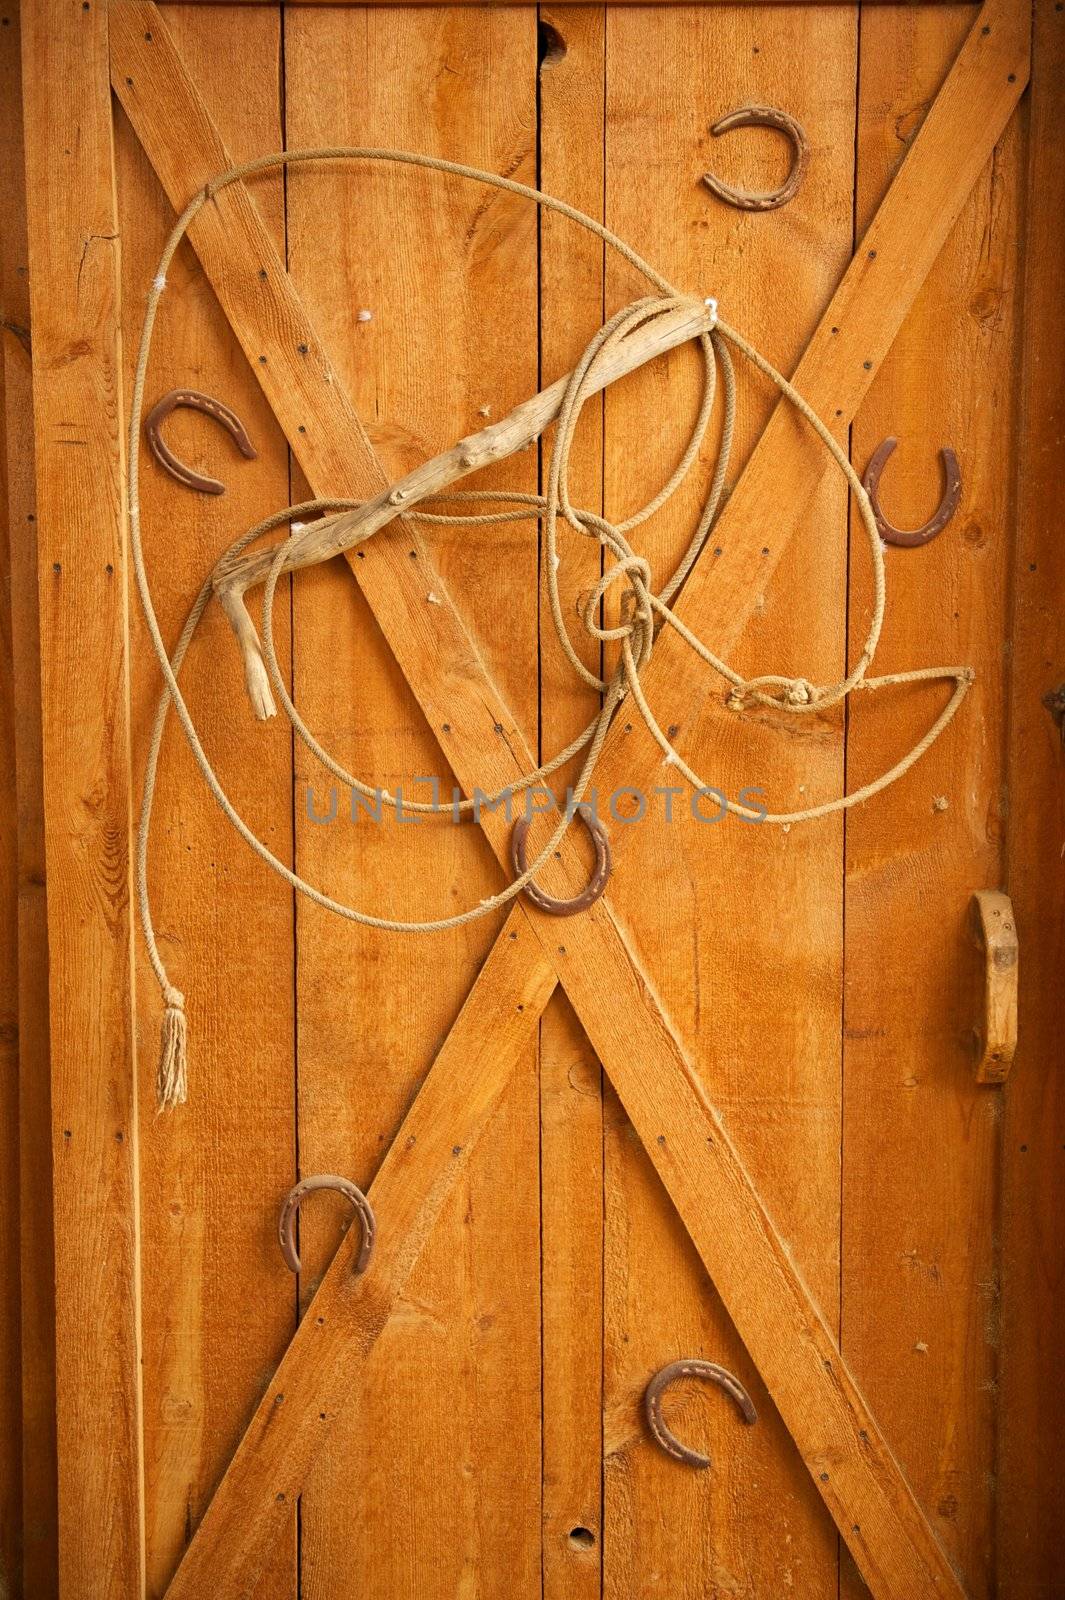 An old lasso is arranged in a decorative way with old rusted horse shoes on a golden wooden door